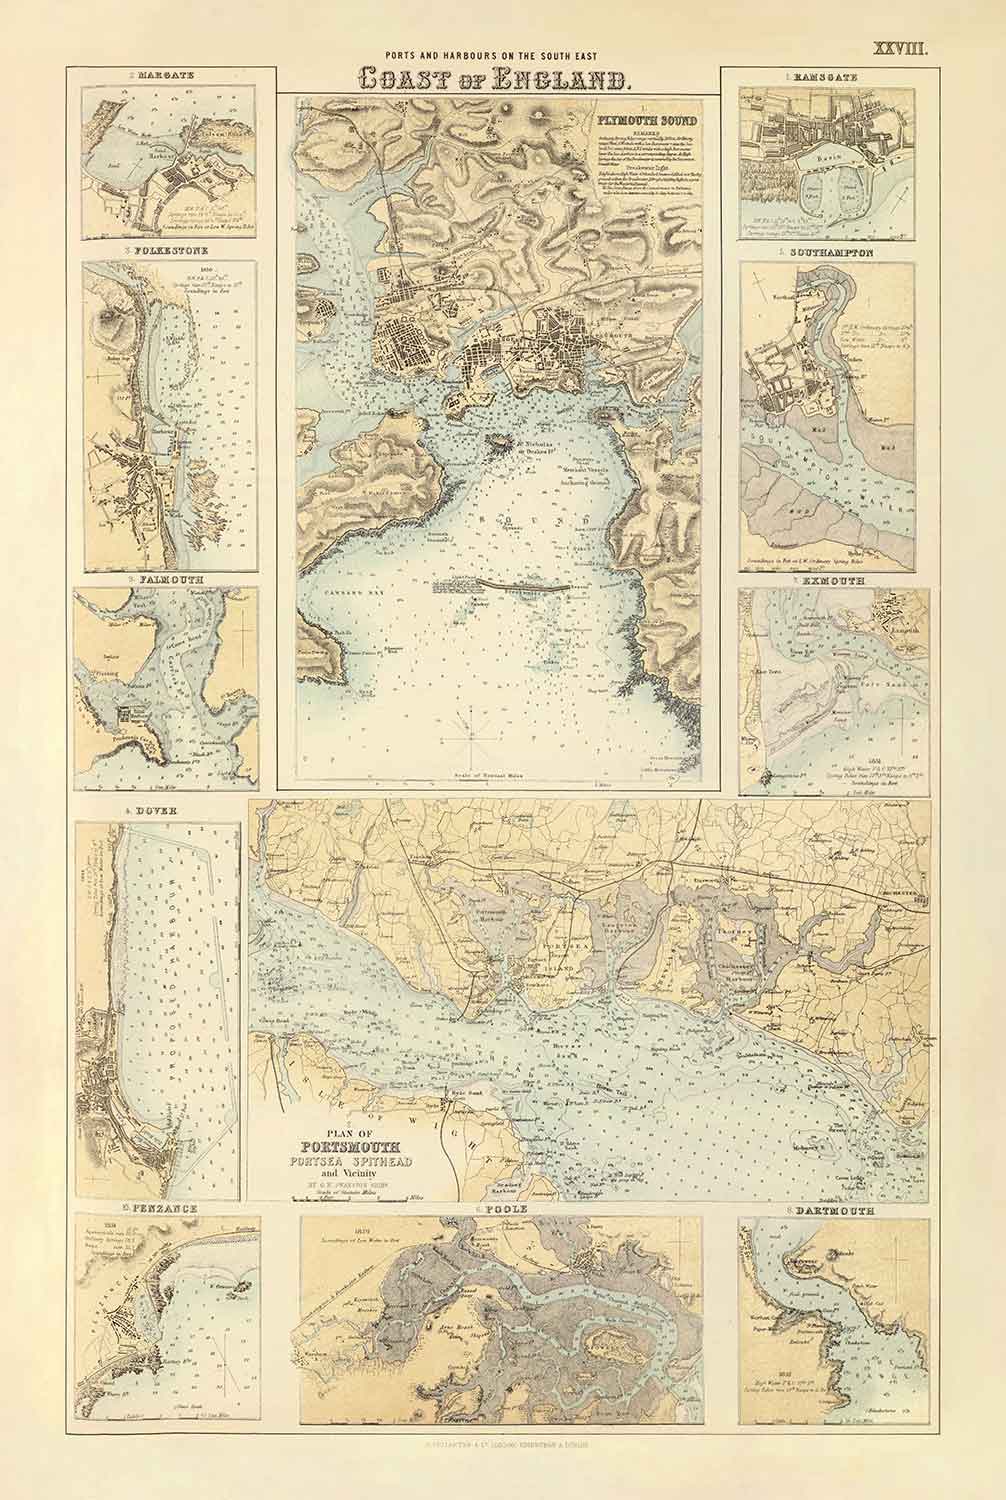 Old Map of the Ports & Harbours in South East of England, 1872 by Fullarton - Margate, Dover, Falmouth, Folkestone, Portsmouth